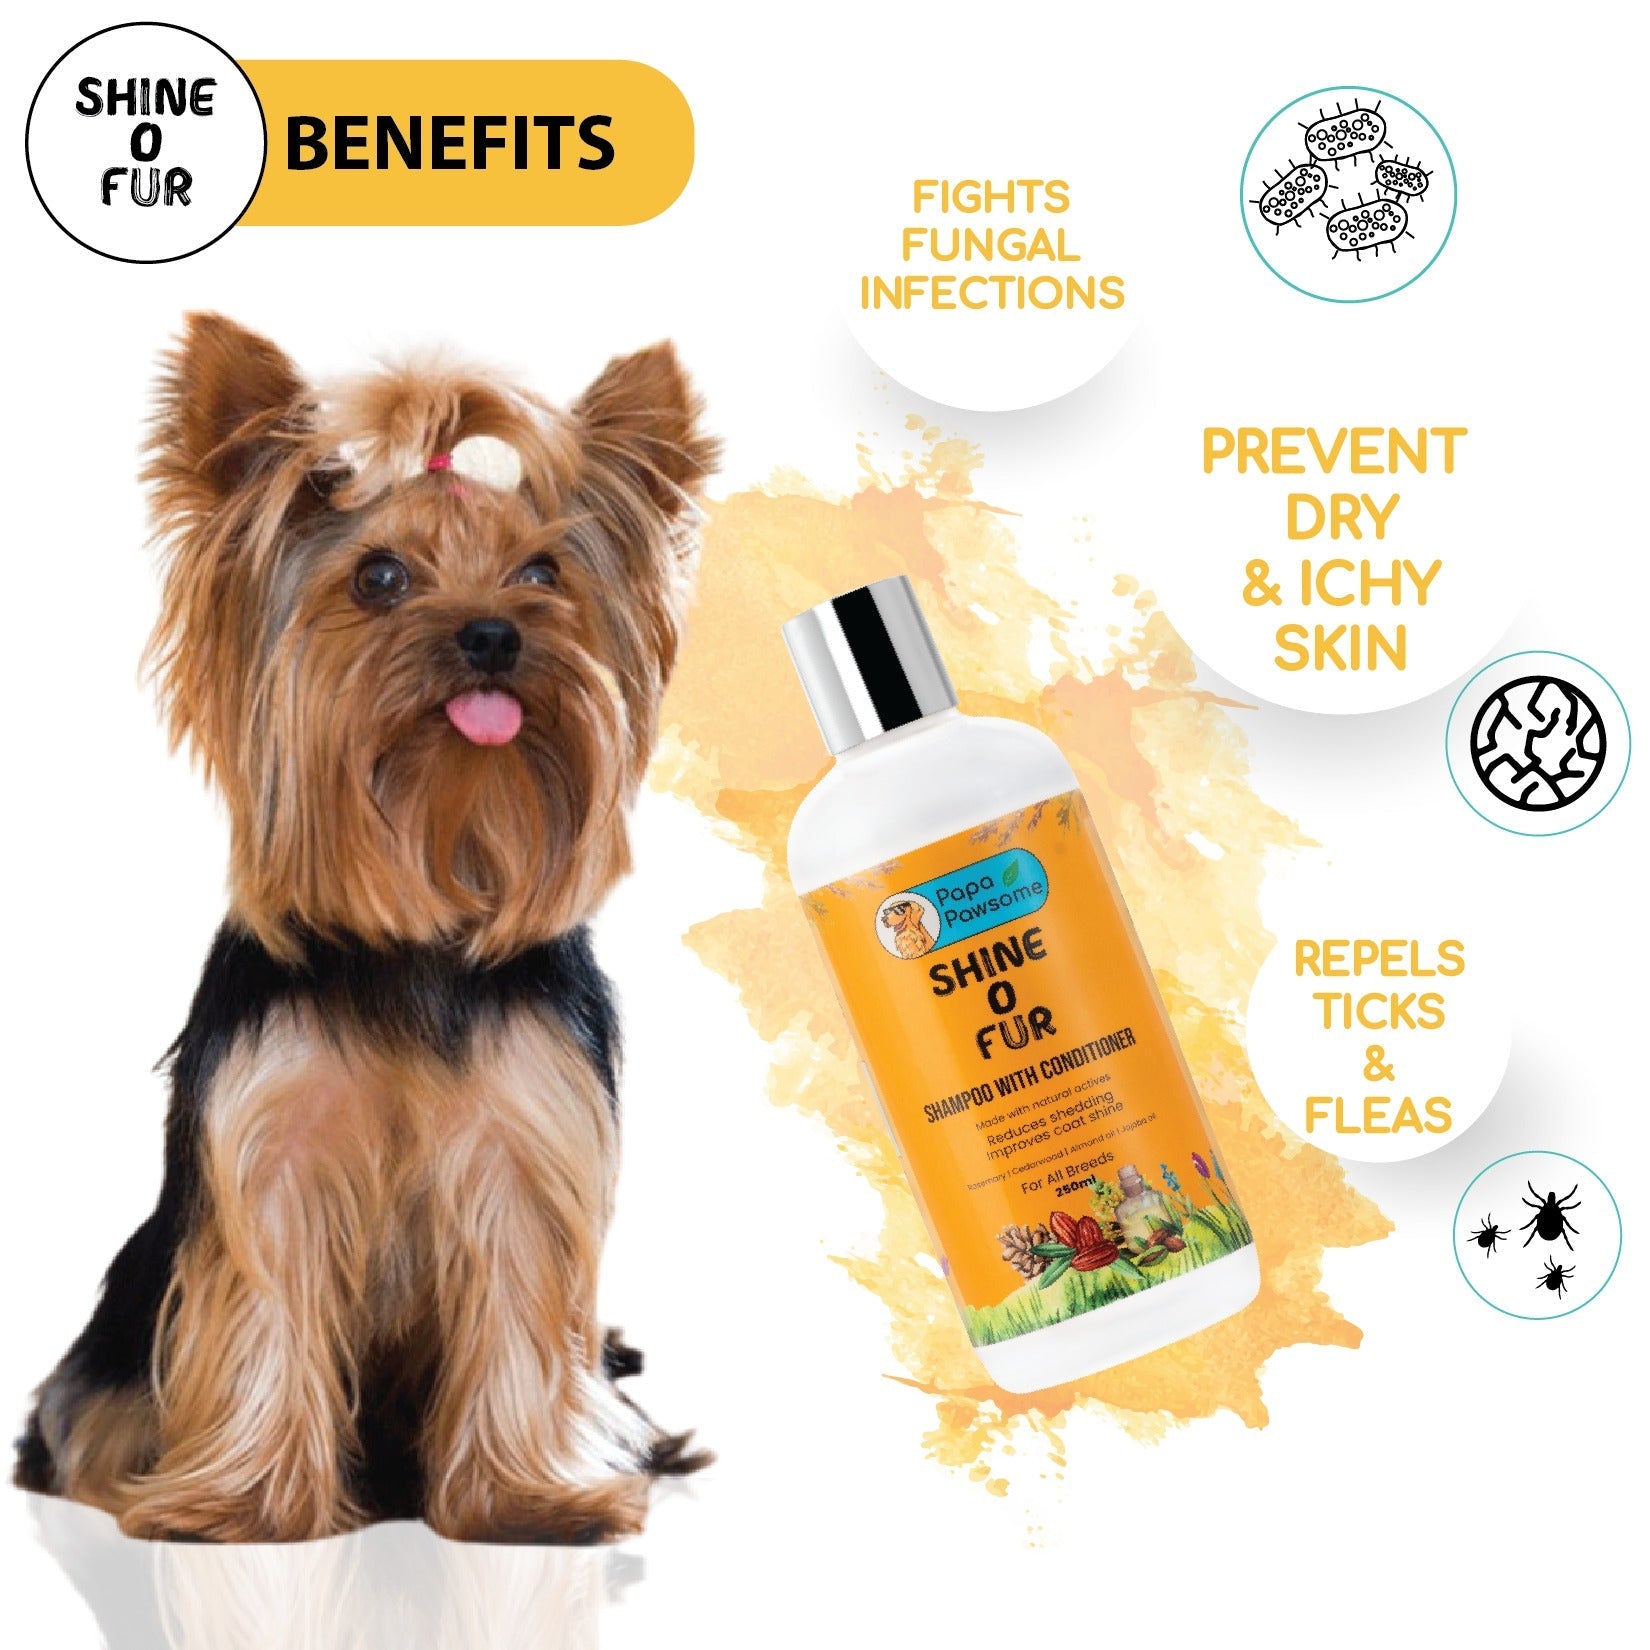 Benefits of pet shampoo: Fights fungal infection, prevents dry and itchy skin, repels ticks and fleas.